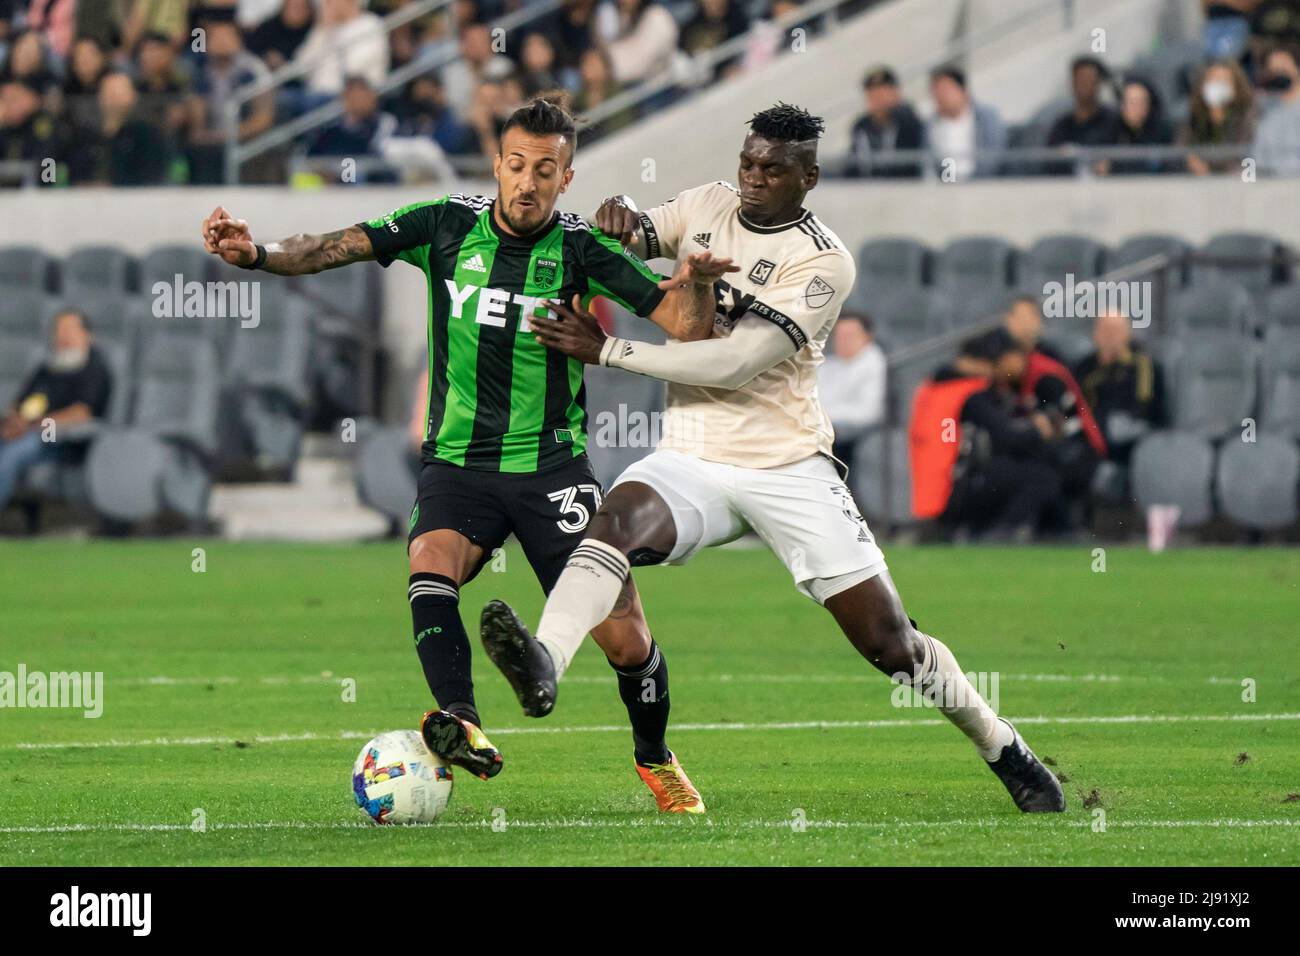 Los Angeles, United States. 18th May, 2022. LAFC defender Jesús Murillo (3)  fouls Austin FC forward Maximiliano Urruti (37) during a MLS match,  Wednesday, May 18, 2022, at the Banc of California